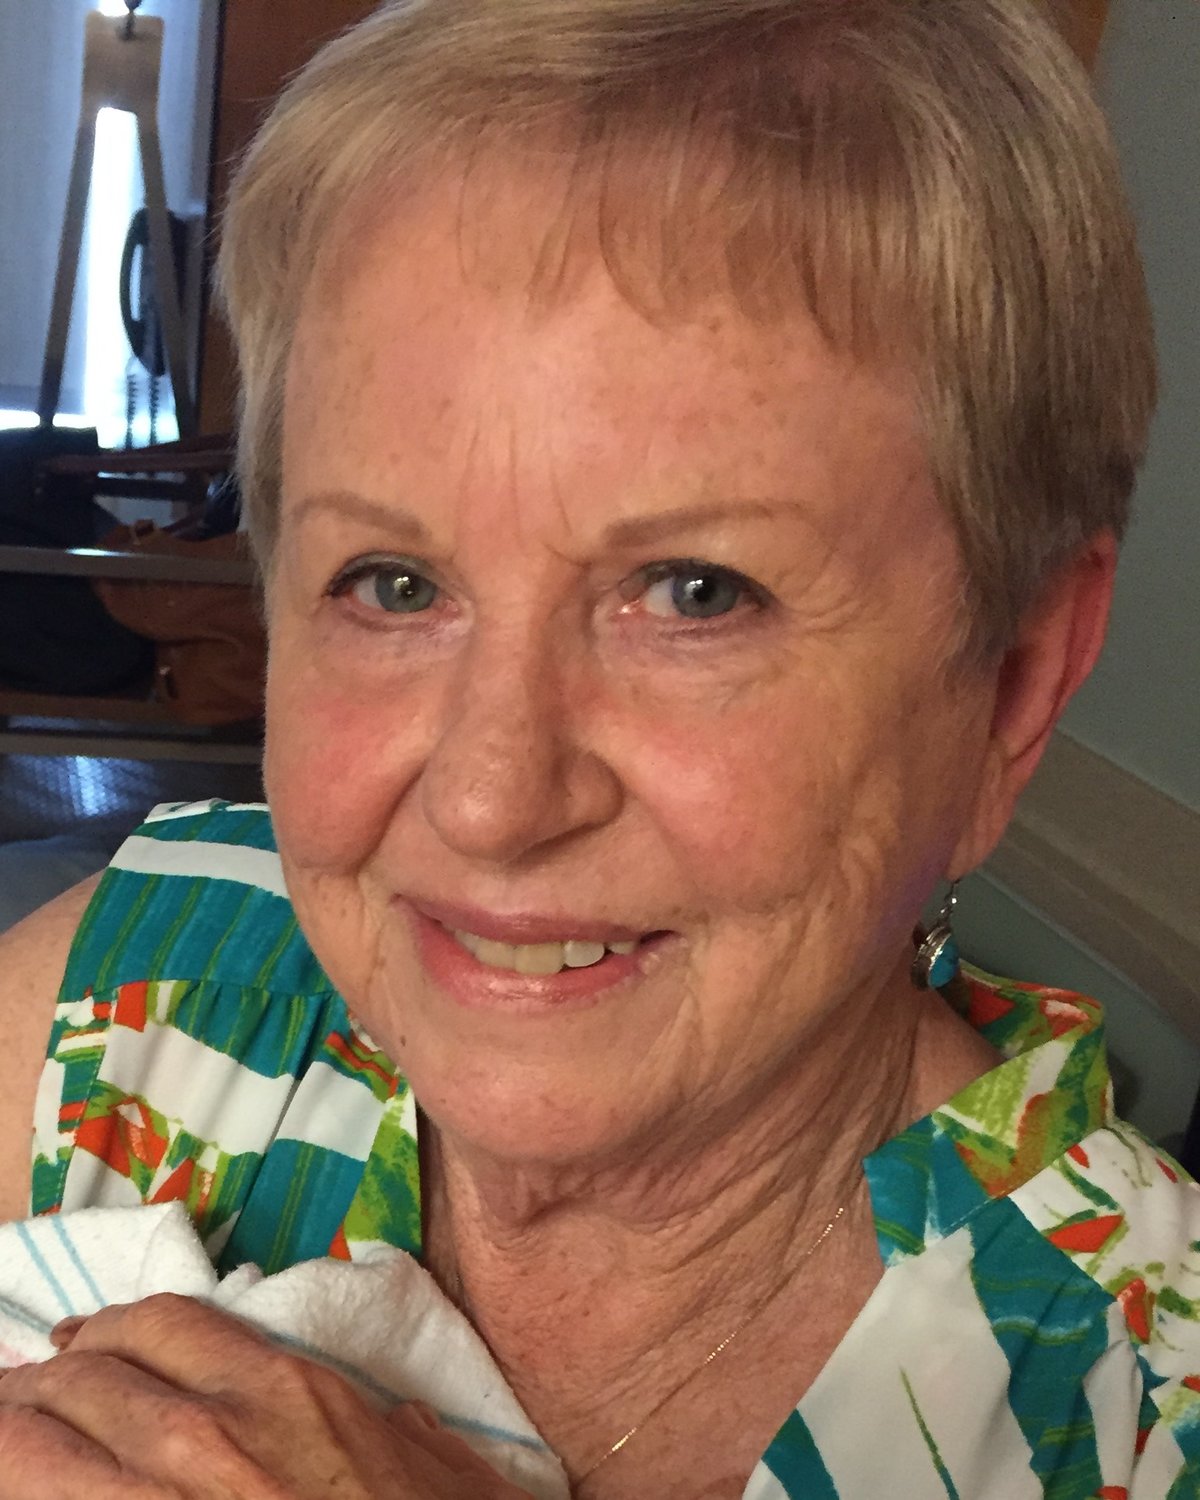 Myra Jo Koehn passed away Aug. 4 from Dementia and Parkinson's Disease. She leaves behind a loving family that will miss her greatly. She was a woman of faith and  was devoted to her family and community.